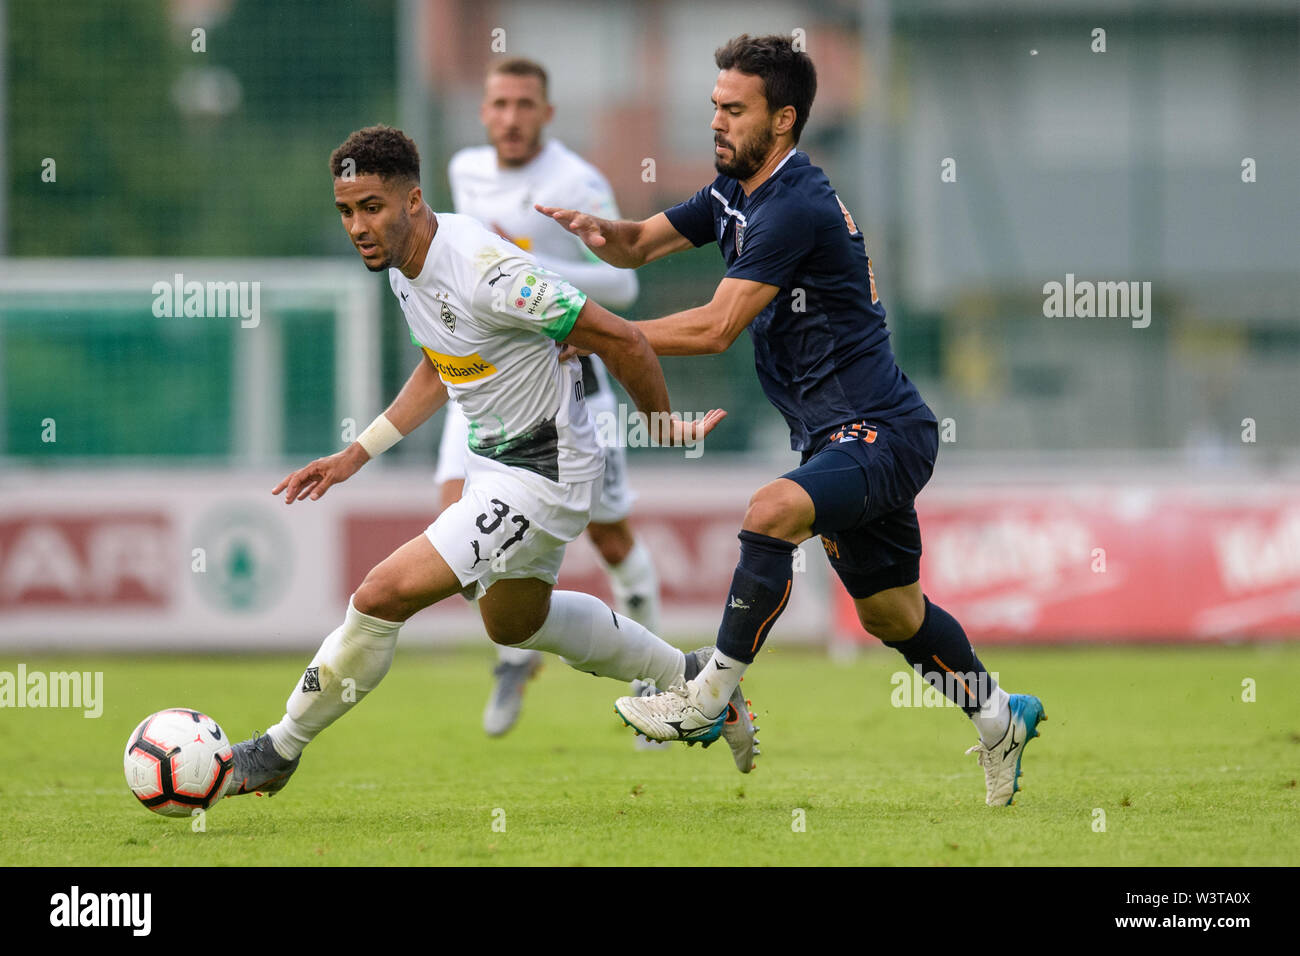 Kufstein, Austria. 17th July, 2019. Soccer: Test matches, Borussia Mönchengladbach - Basaksehir FC in Kufstein. Keanan Bennetts of Mönchengladbach (l) and Furkan Soyalp of Istanbul in the duel for the ball. Credit: Matthias Balk/dpa/Alamy Live News Stock Photo